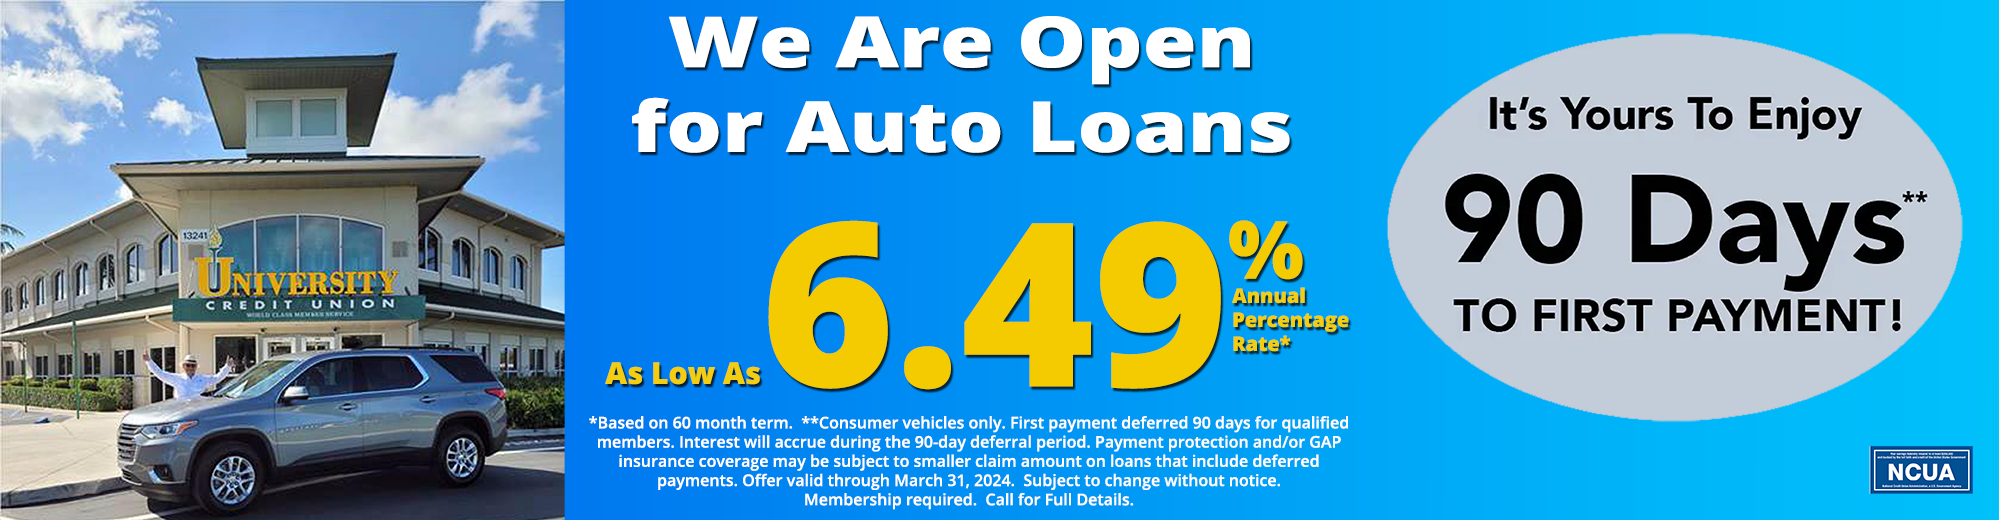 Open for Auto Loans as Low as 6.49%